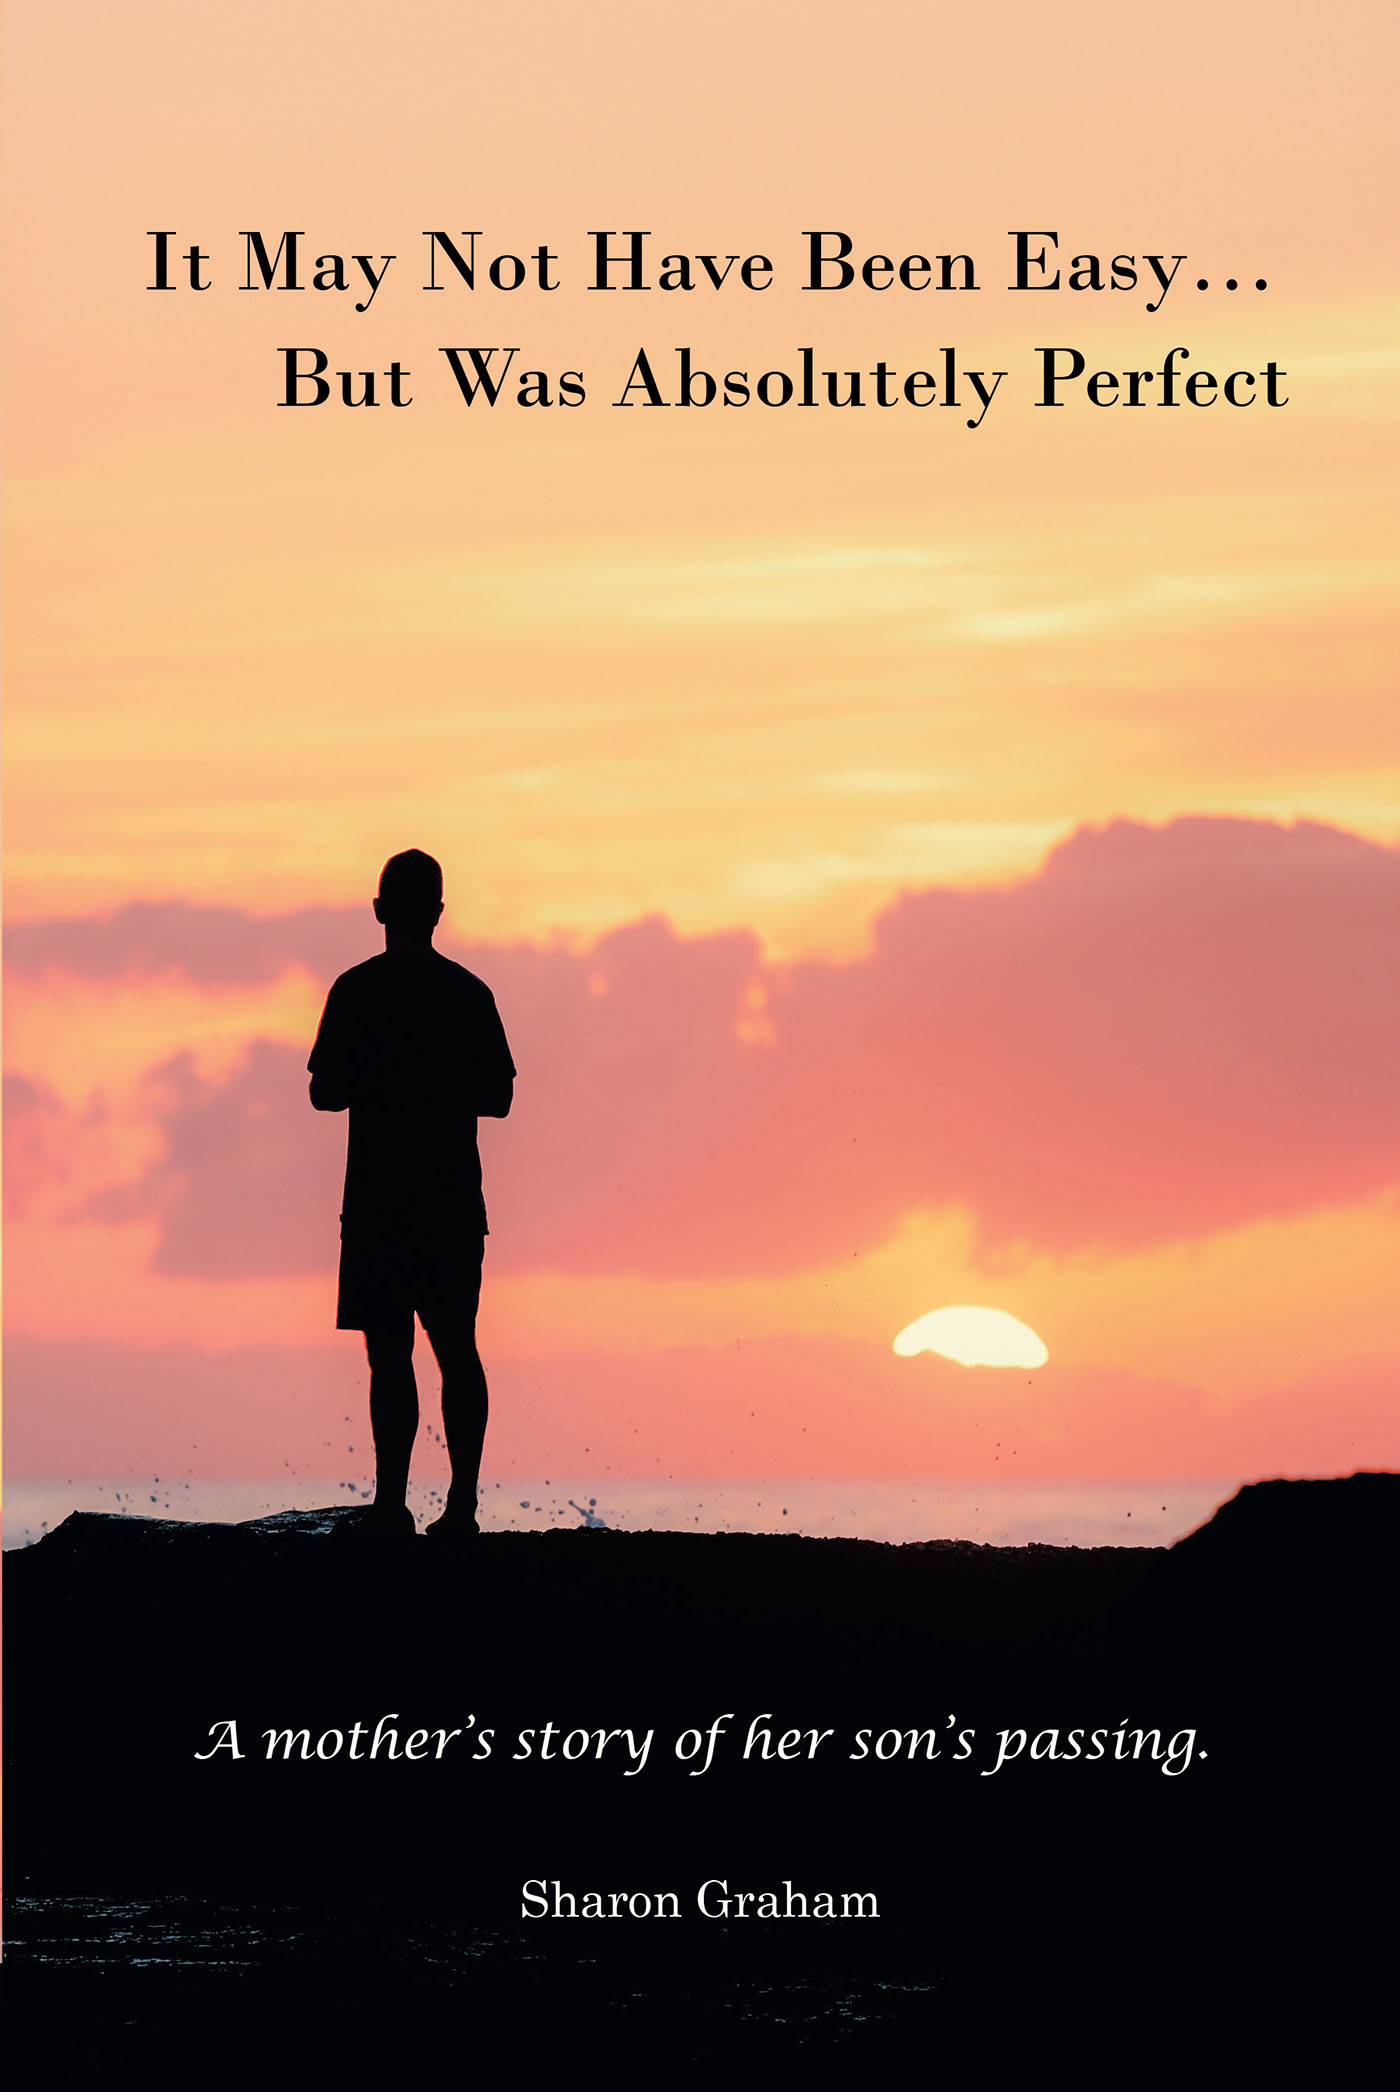 Sharon Graham’s Newly Released “It May Not Have Been Easy... But Was Absolutely Perfect: A mother’s story of her son’s passing.” is a Potent Memoir